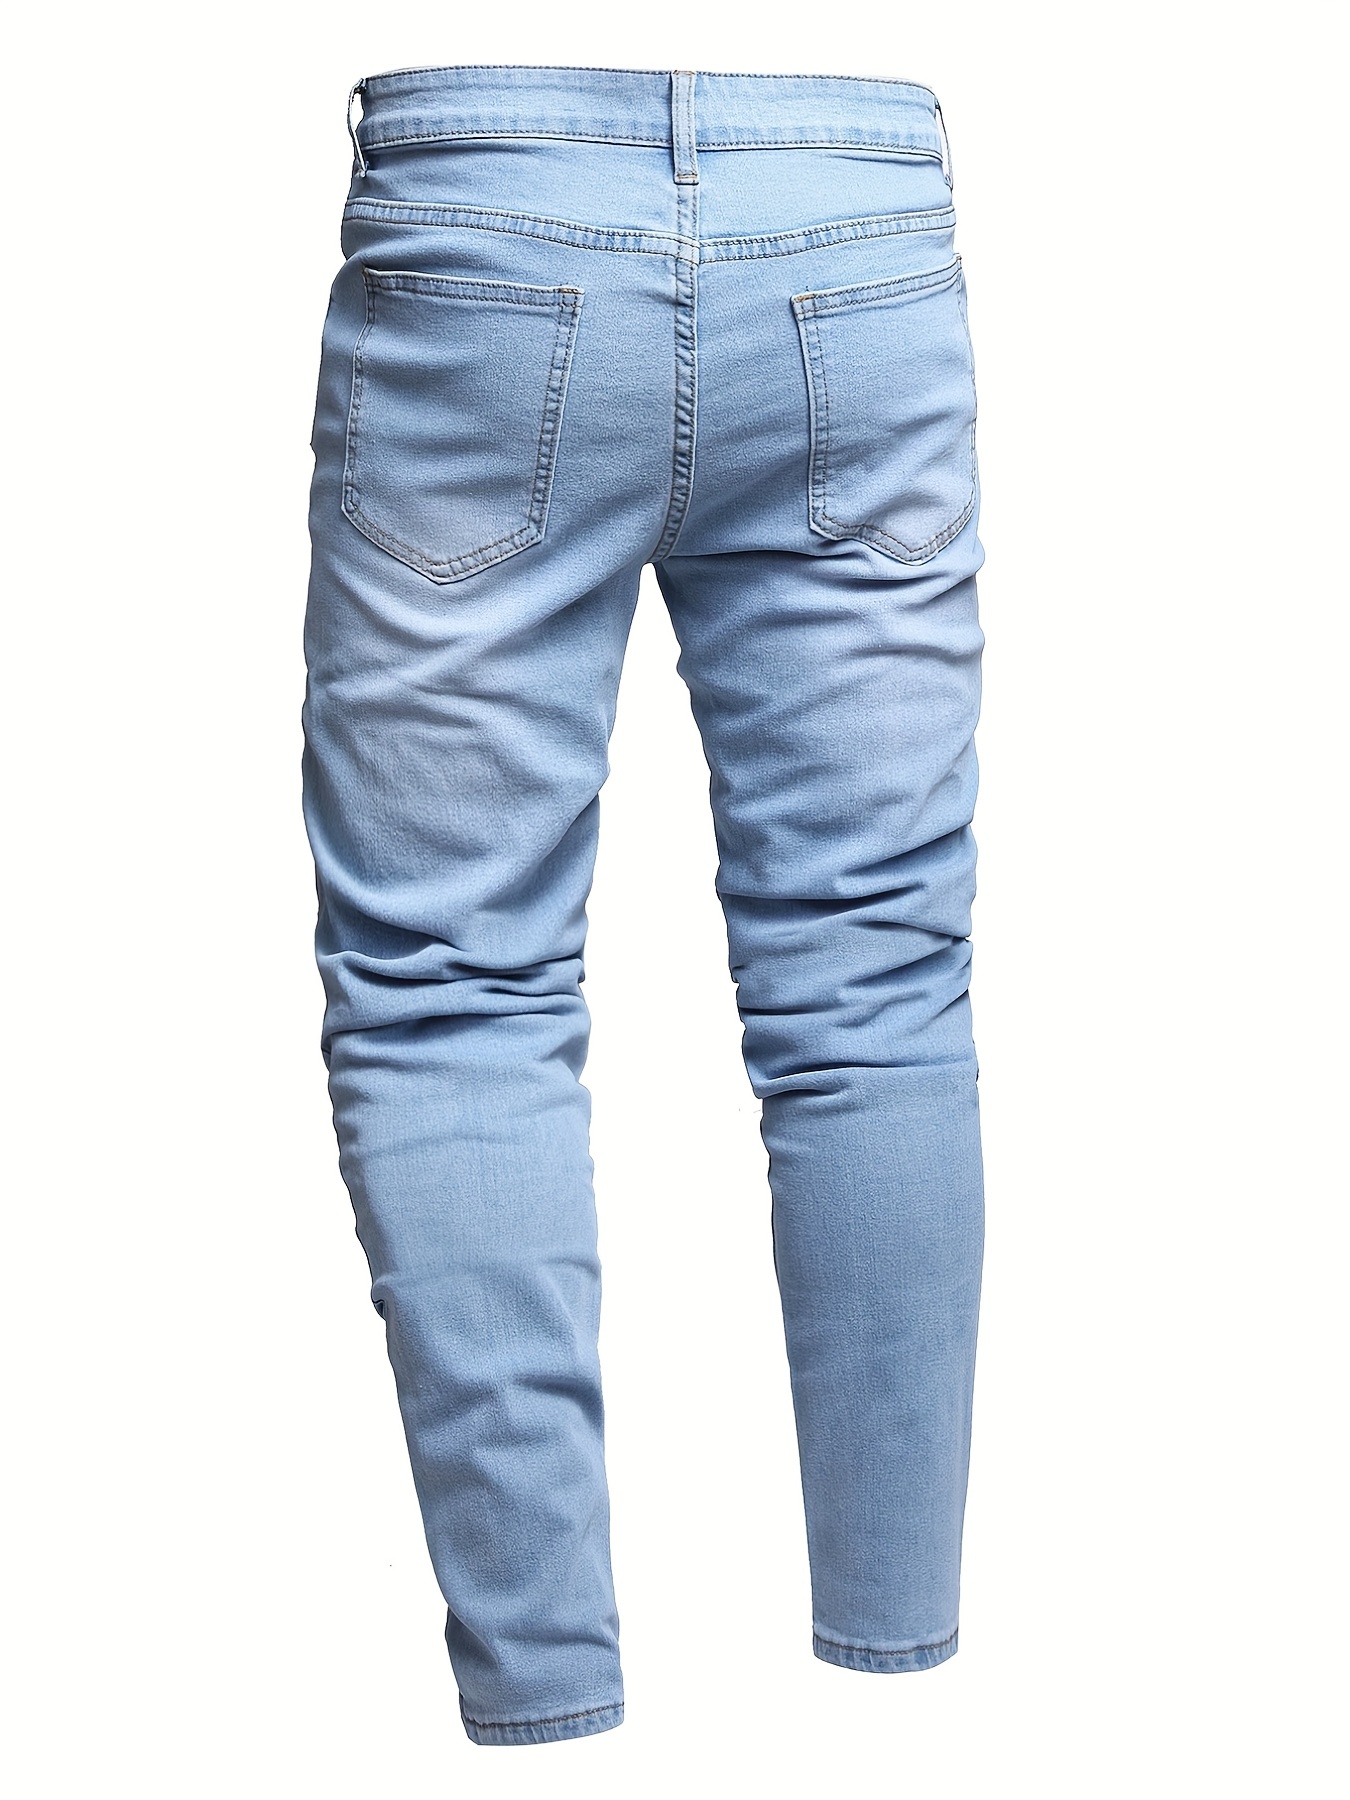 Mens Skinny Jeans With Embroidered Patterns Slim Fit Stretch Denim